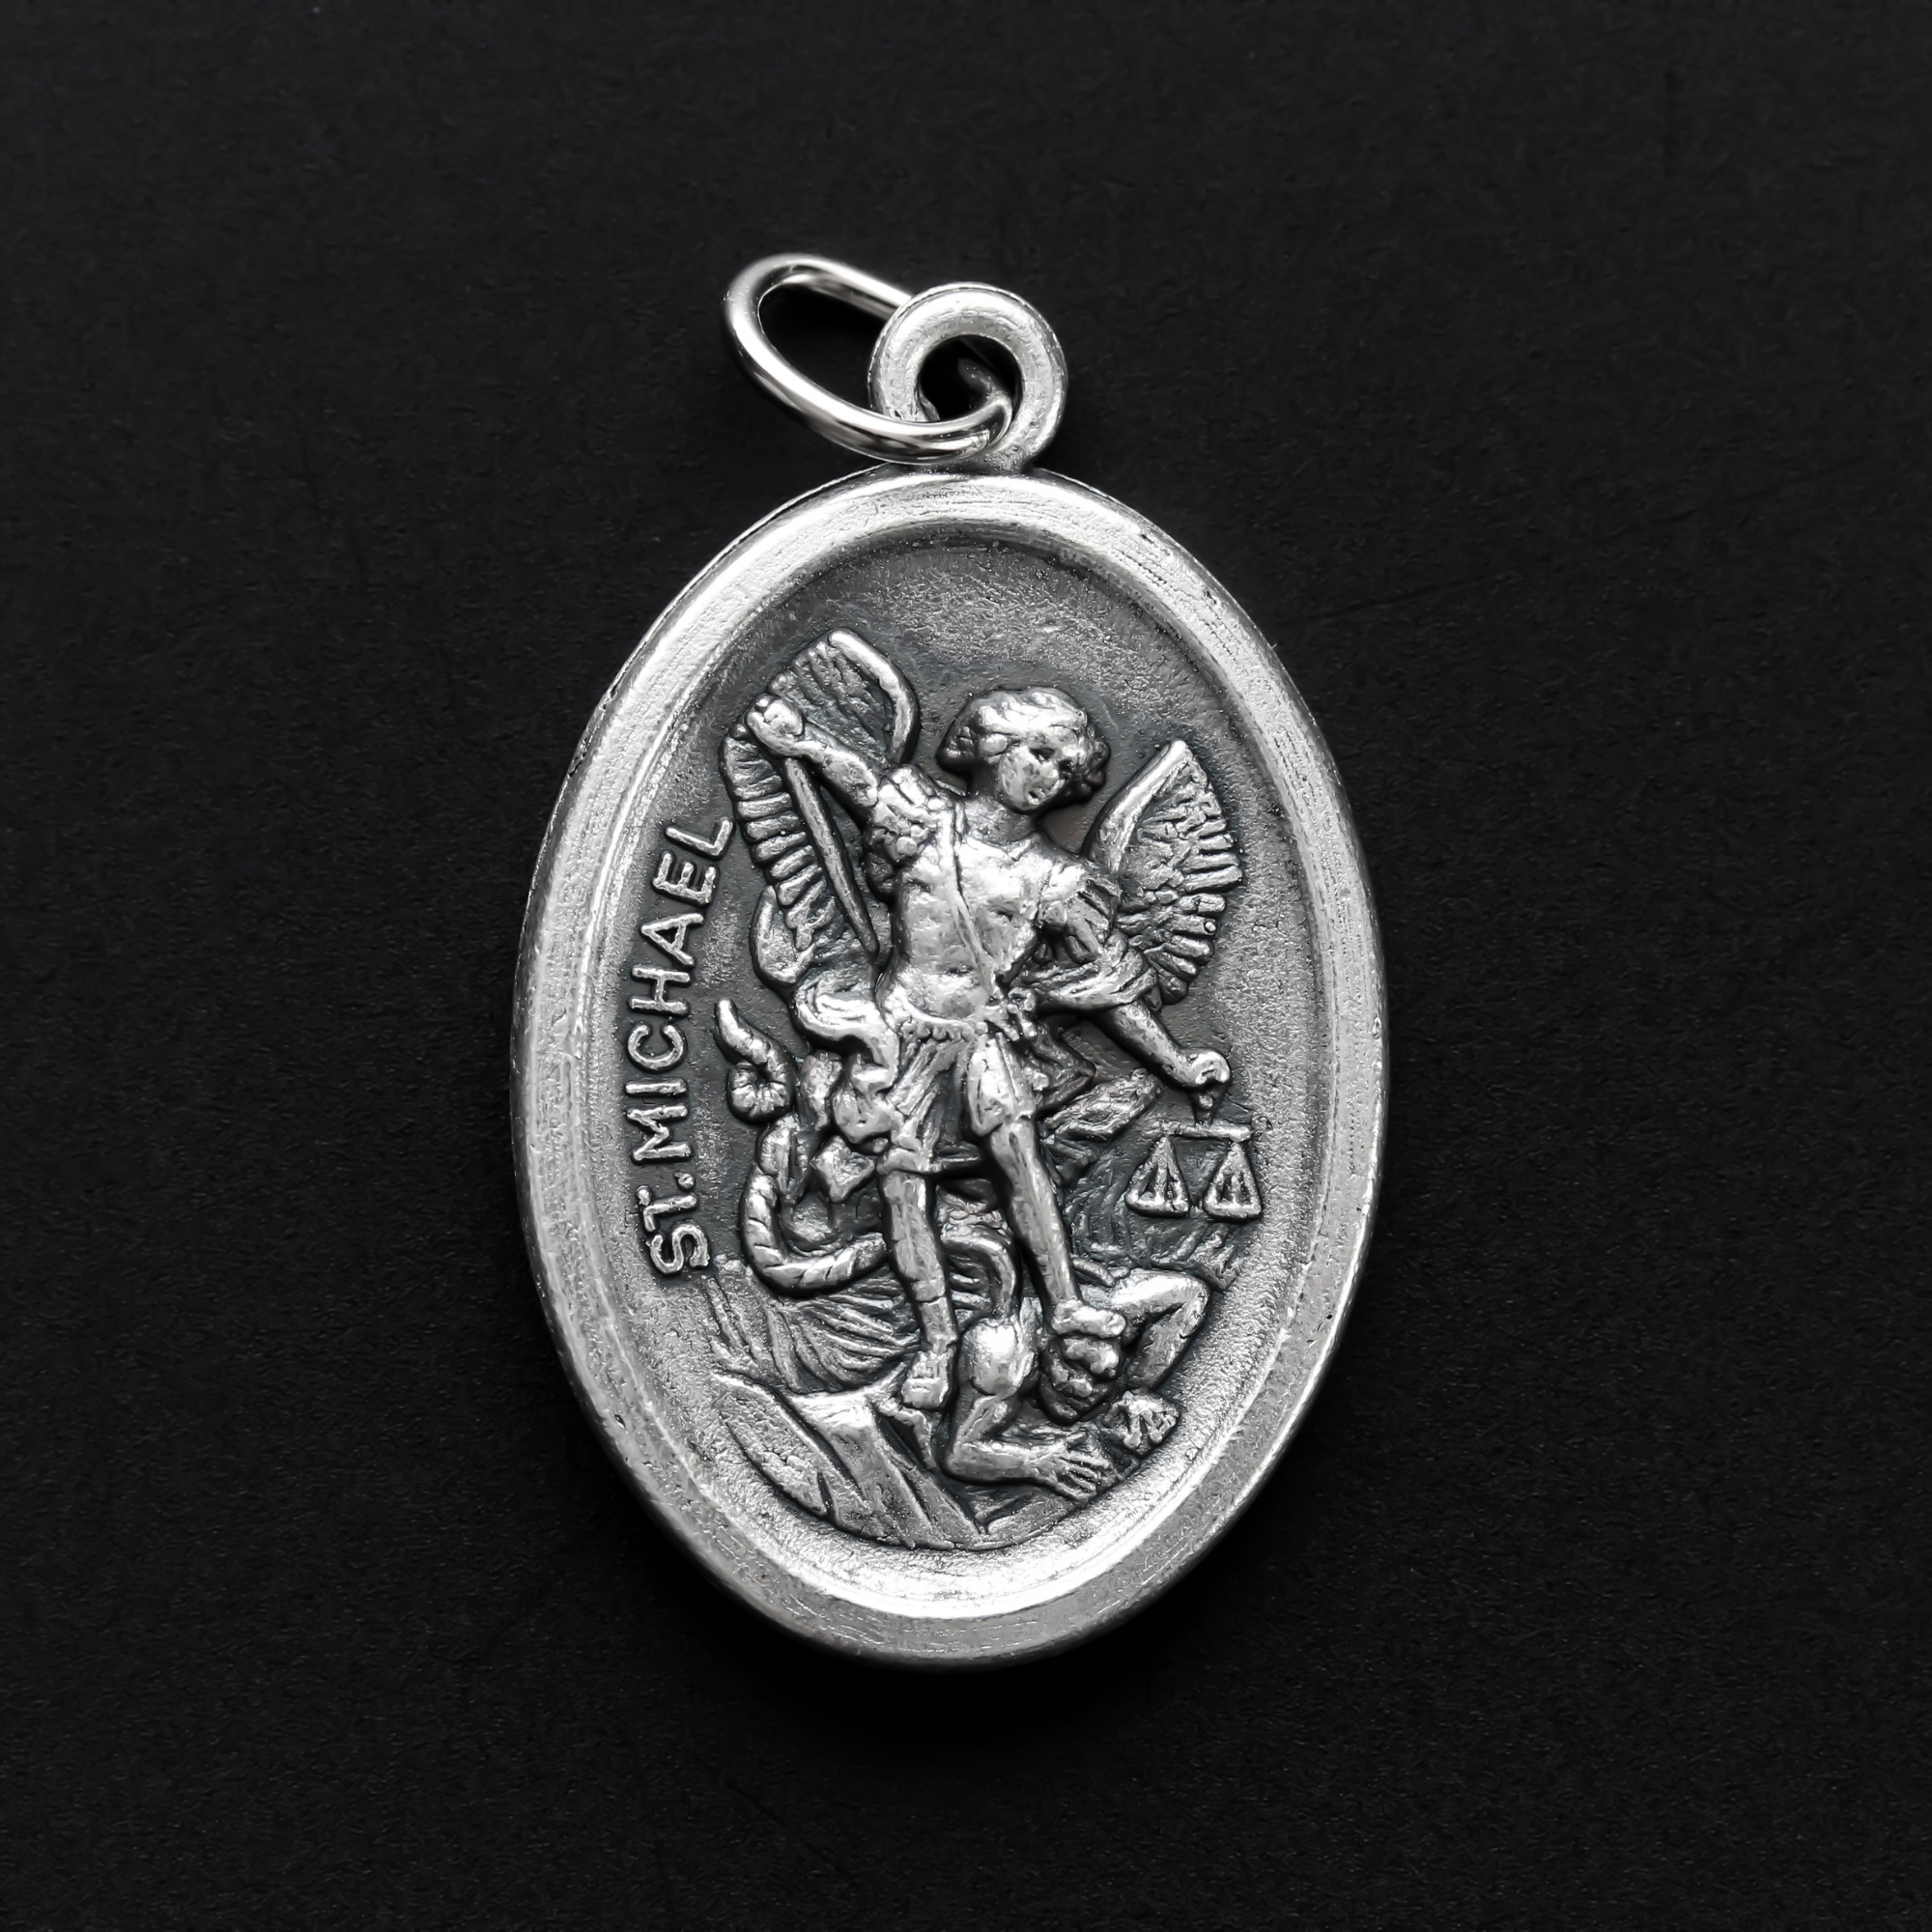 saint michael die cast silver tone one inch oval medal